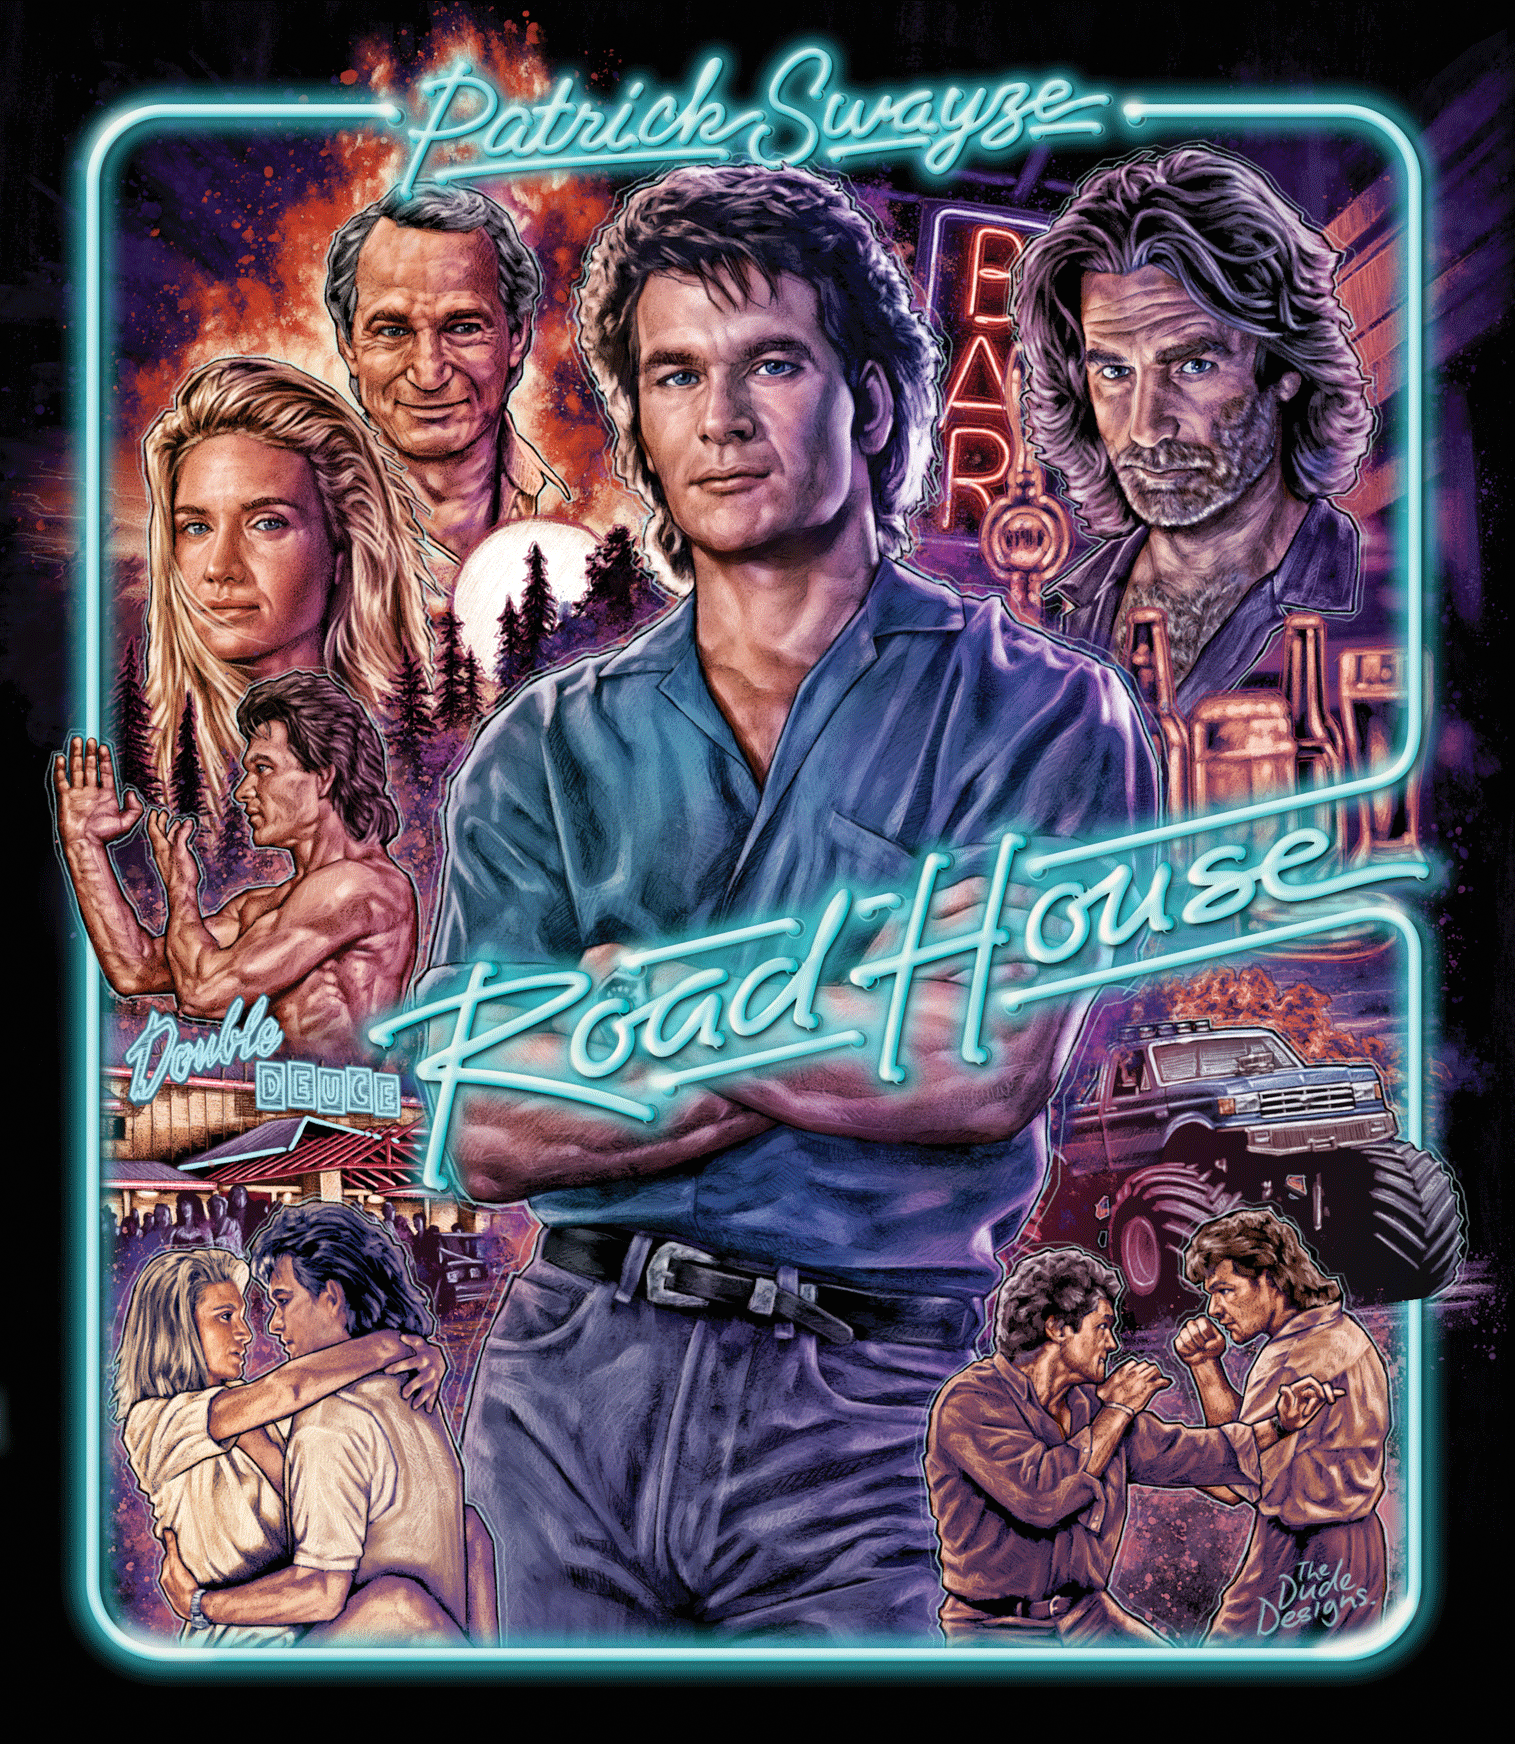 ROAD HOUSE - 4K ULTRA HD / BLU-RAY (LIMITED EDITION) - OOP